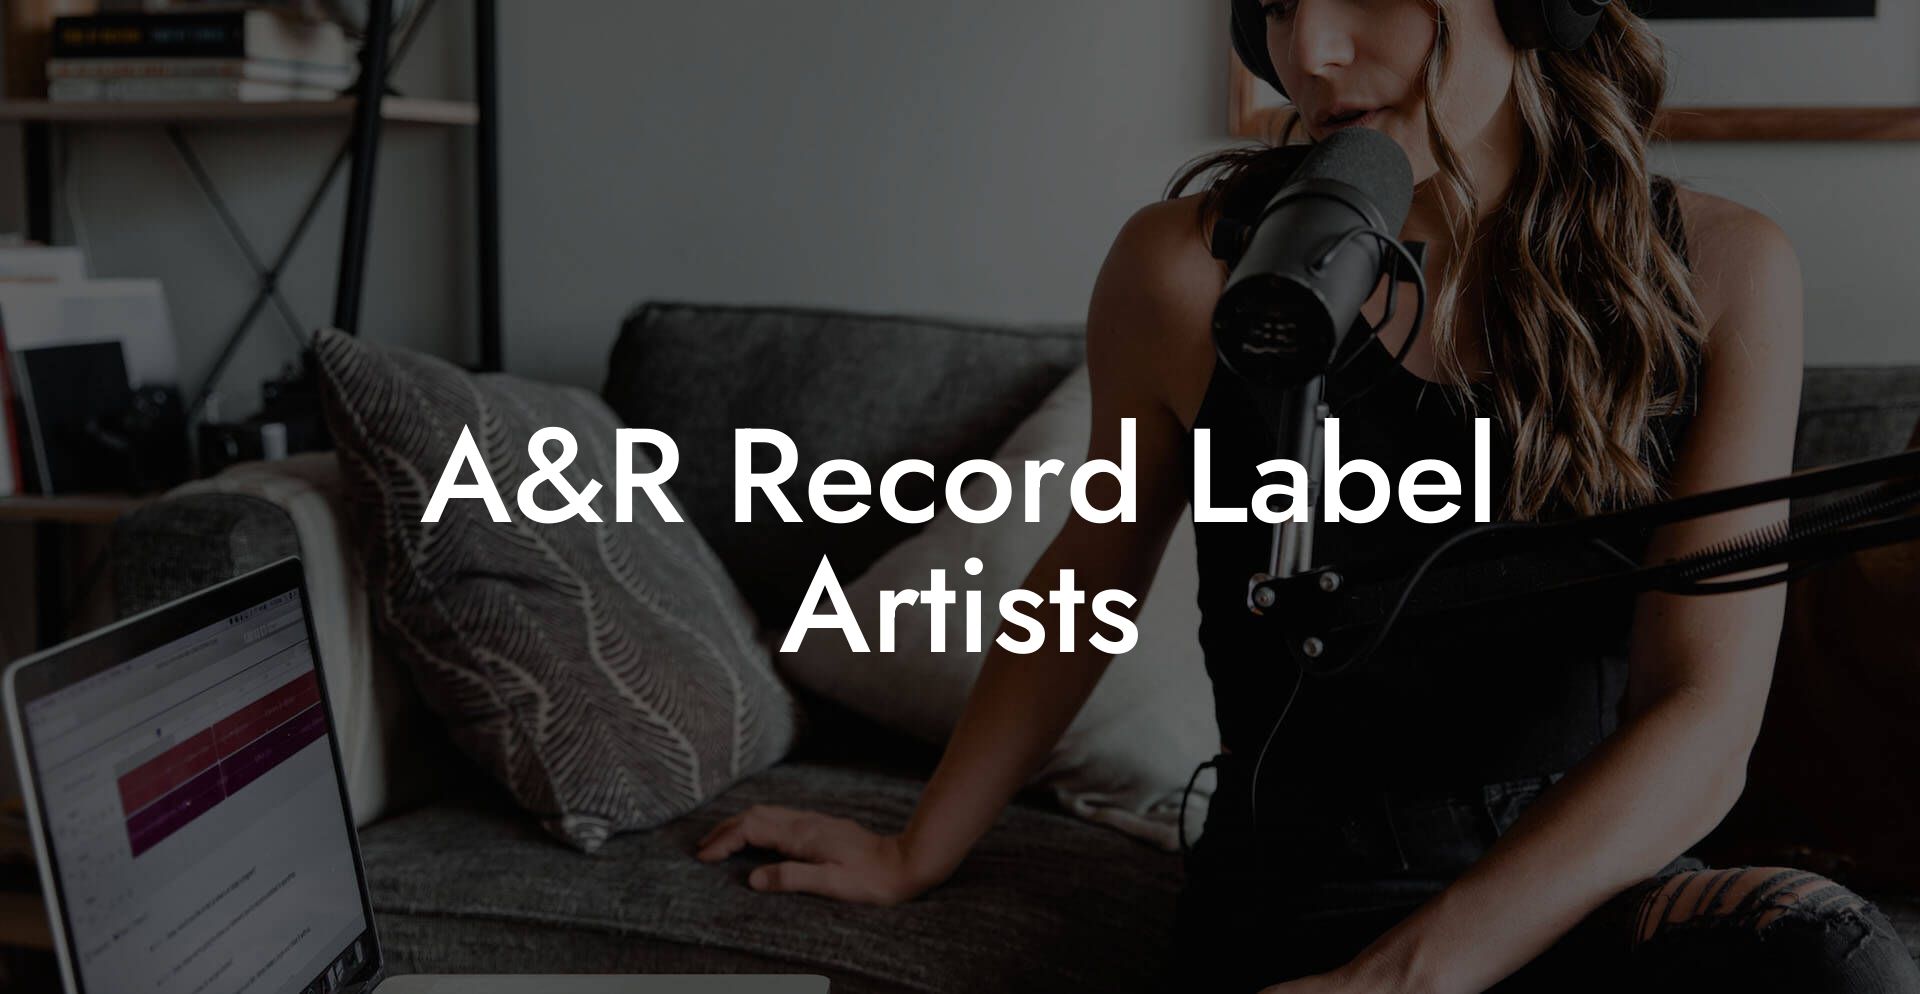 A&R Record Label Artists